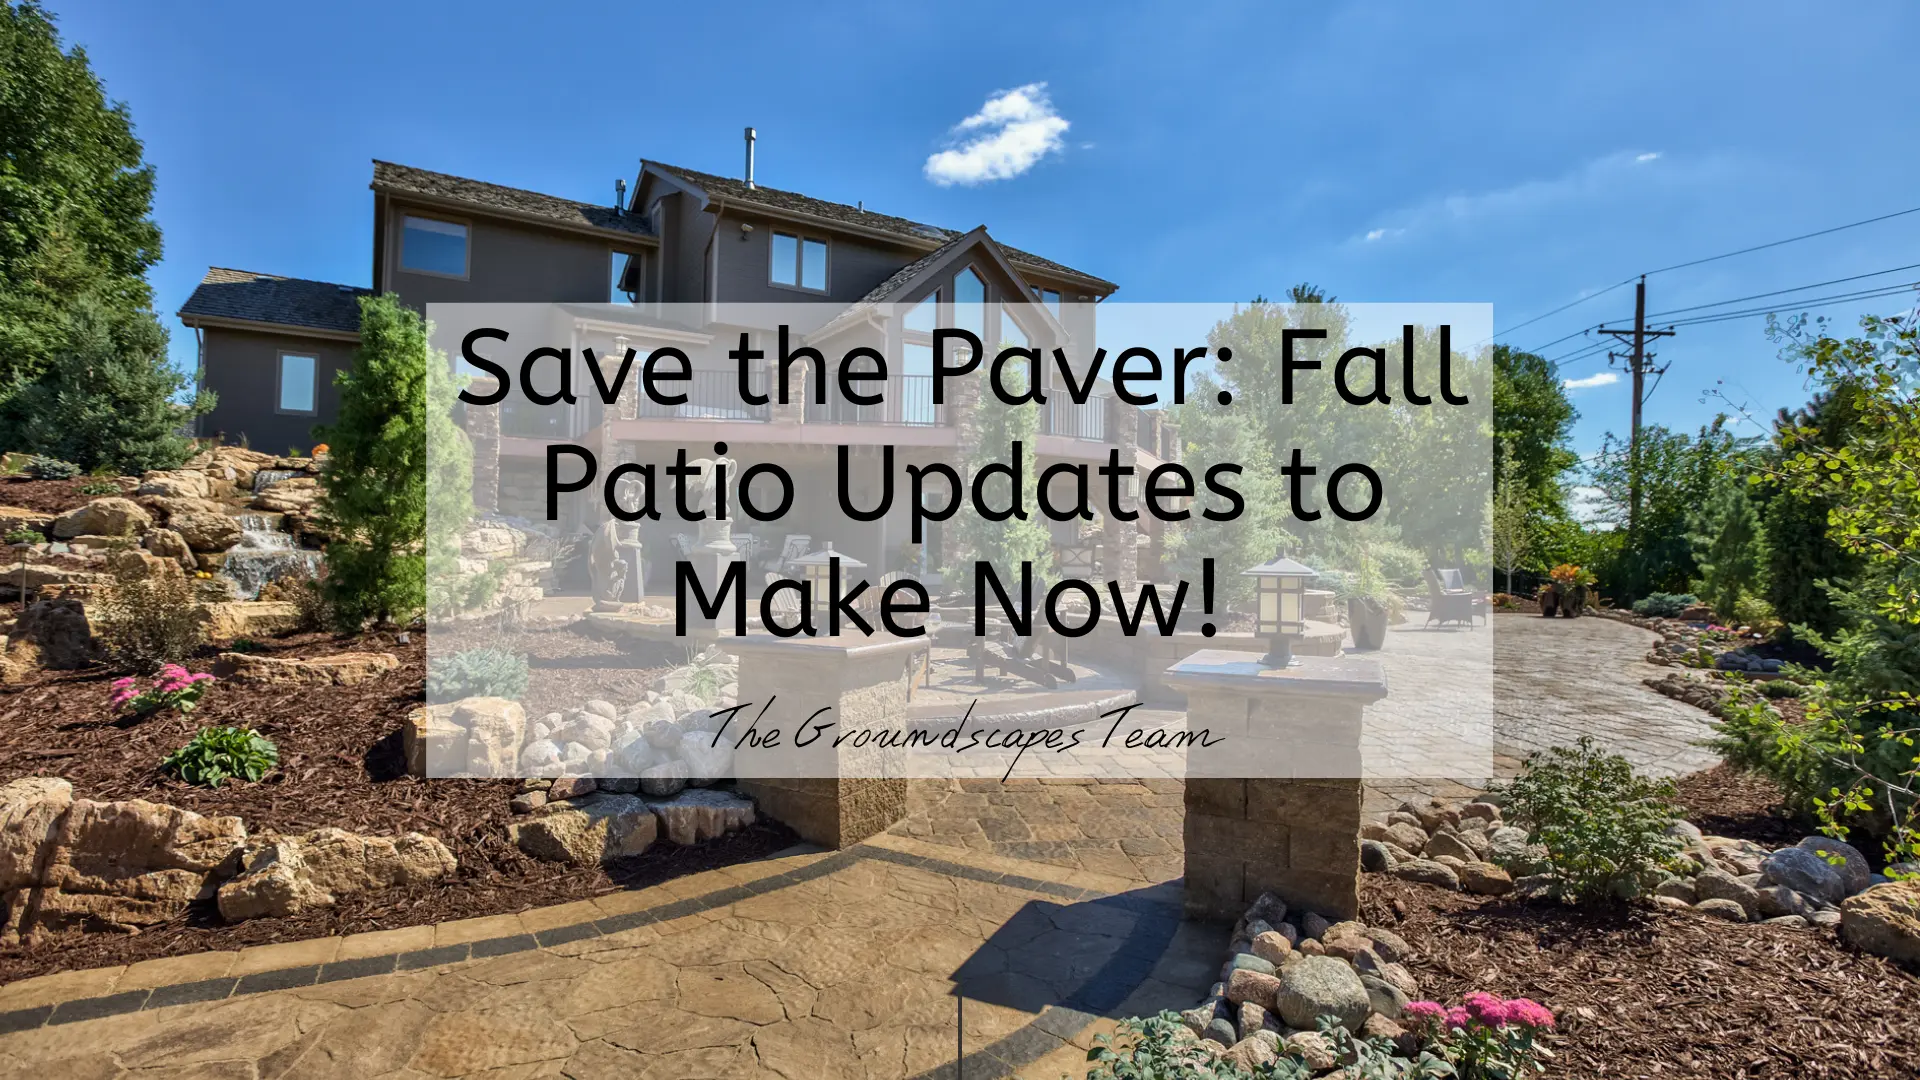 Save the Paver: Fall Patio Updates to Make Now!